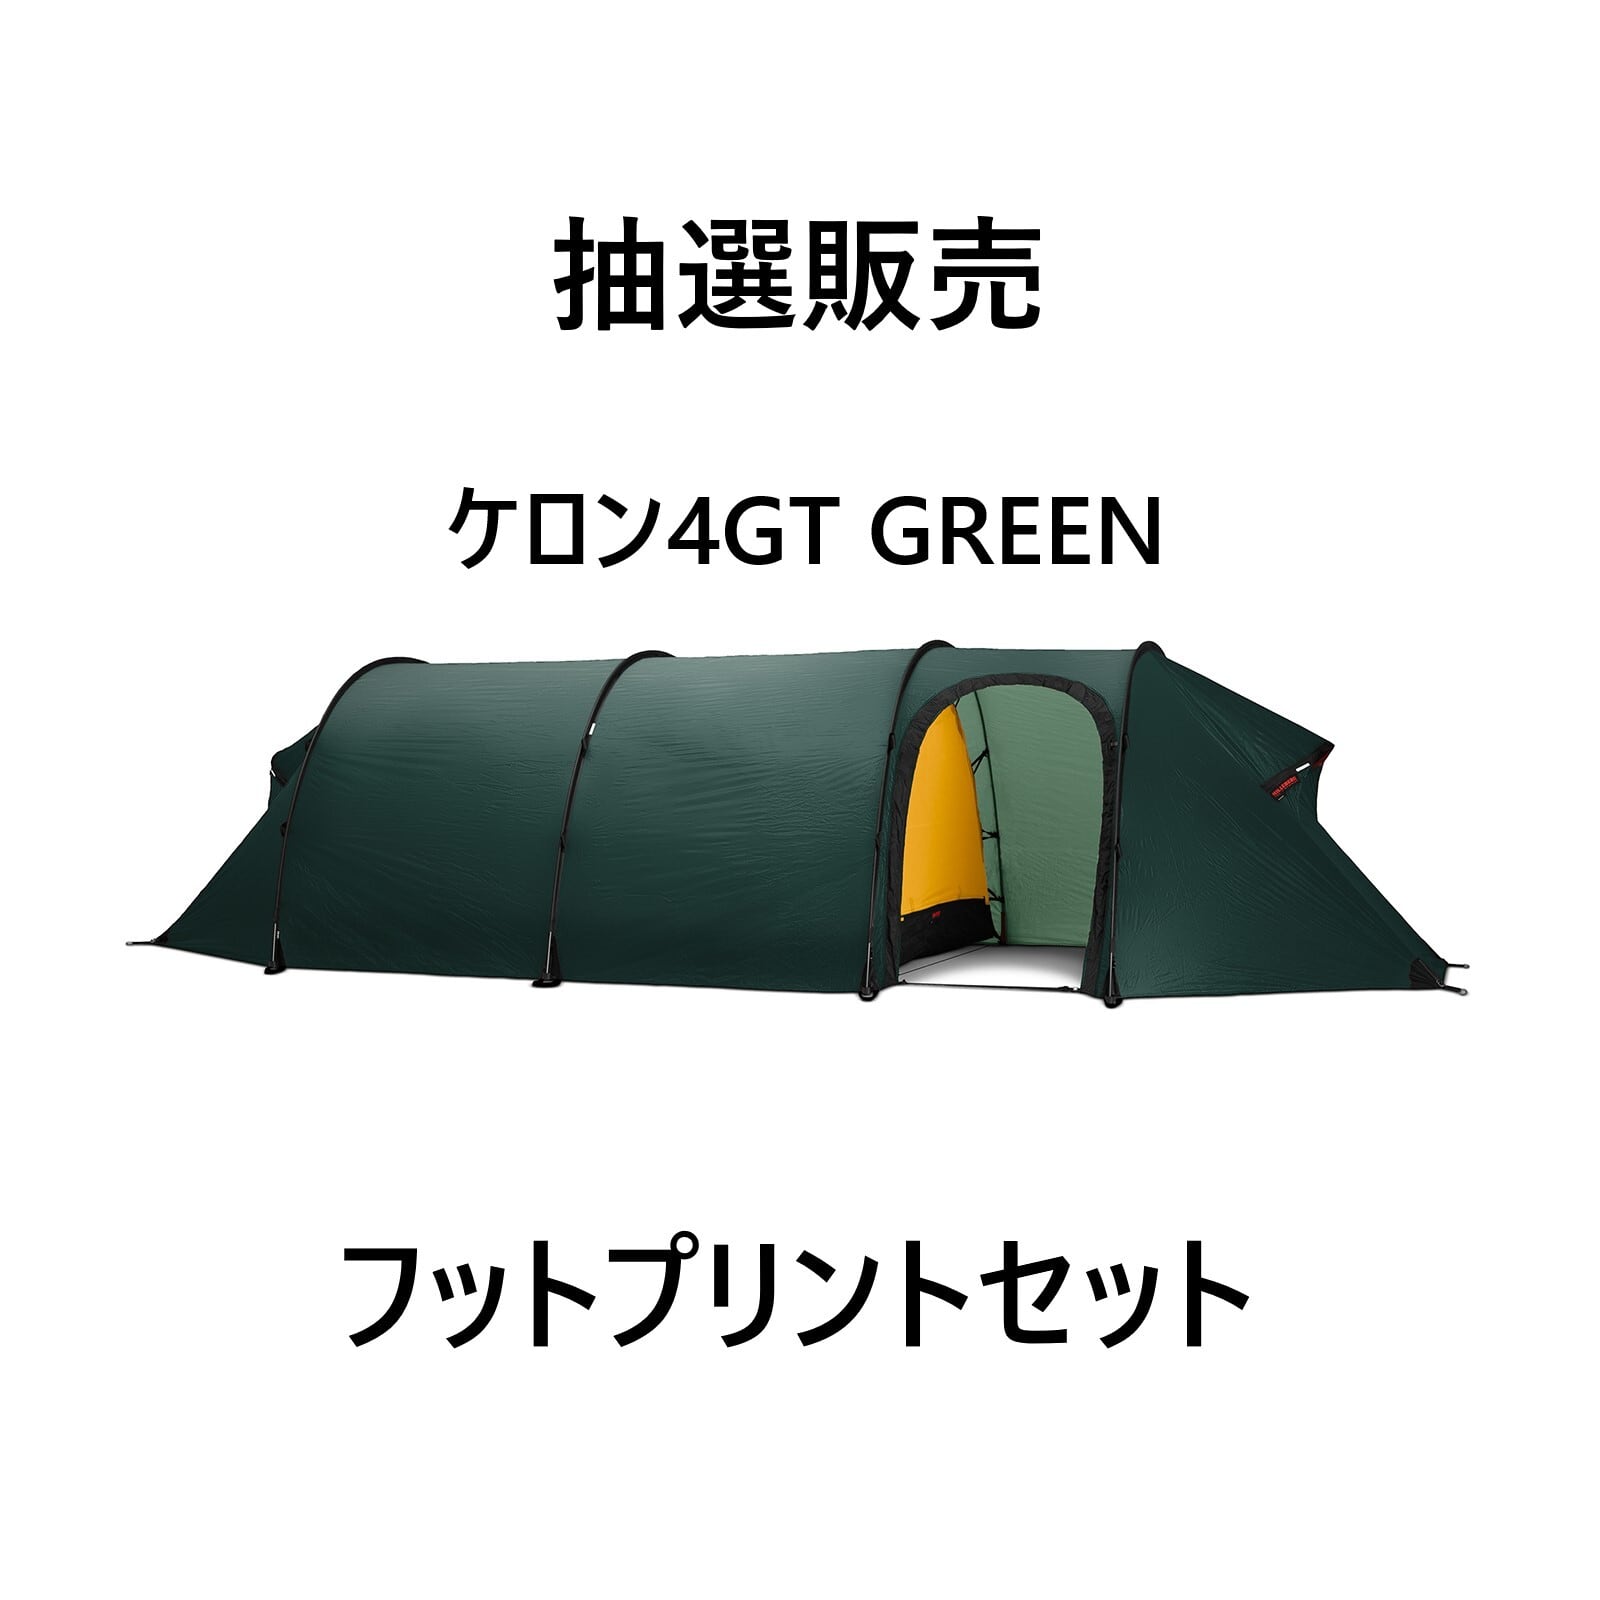 HILLEBERG　ヒルバーグ ケロン4 GT　グリーン　フットプリントセット | sotosotodays powered by BASE